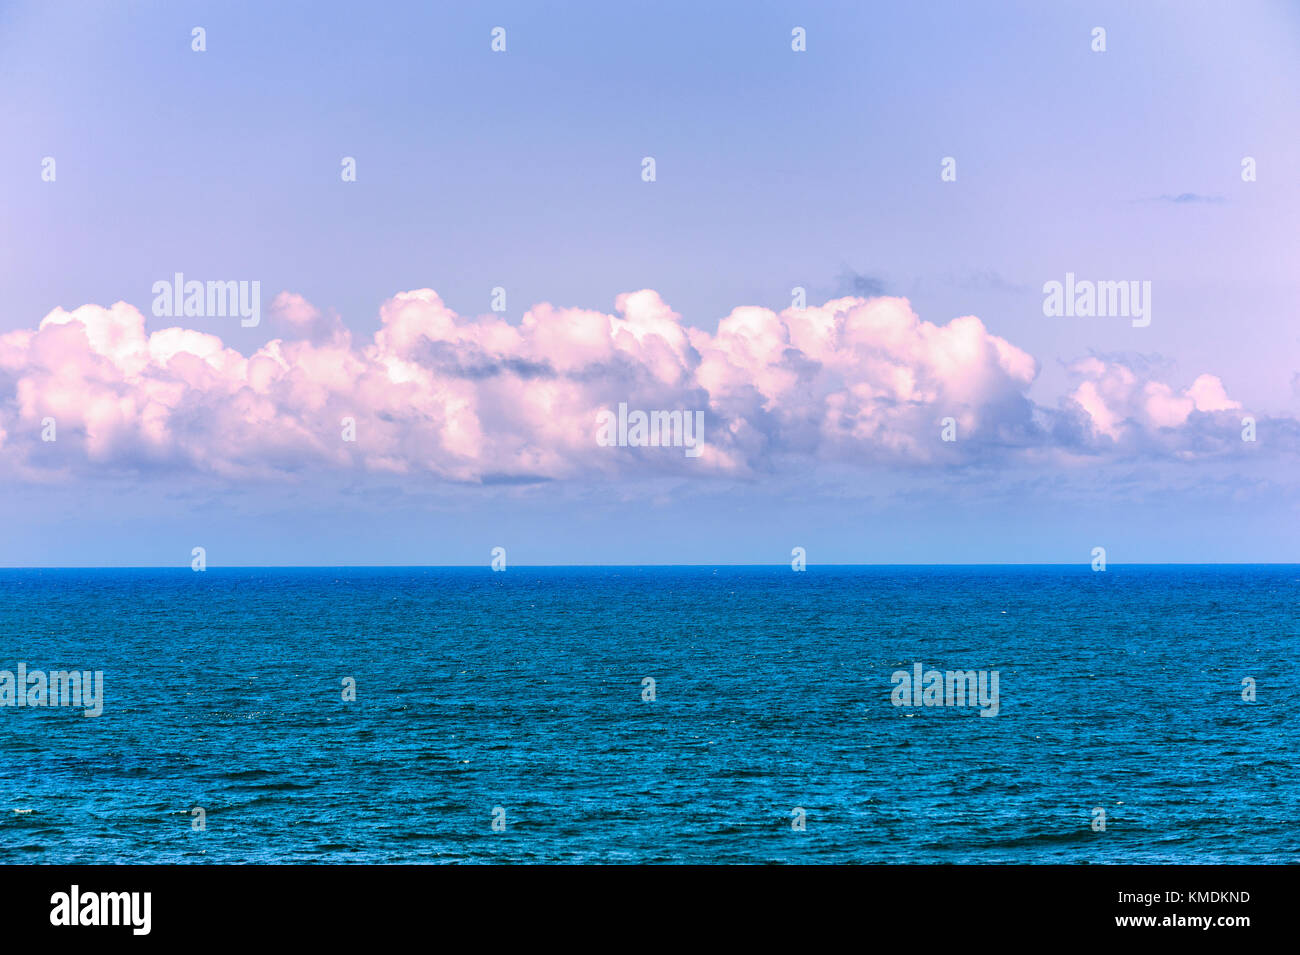 A simplistic view of the Pacific Ocean and the sky with clouds. Stock Photo